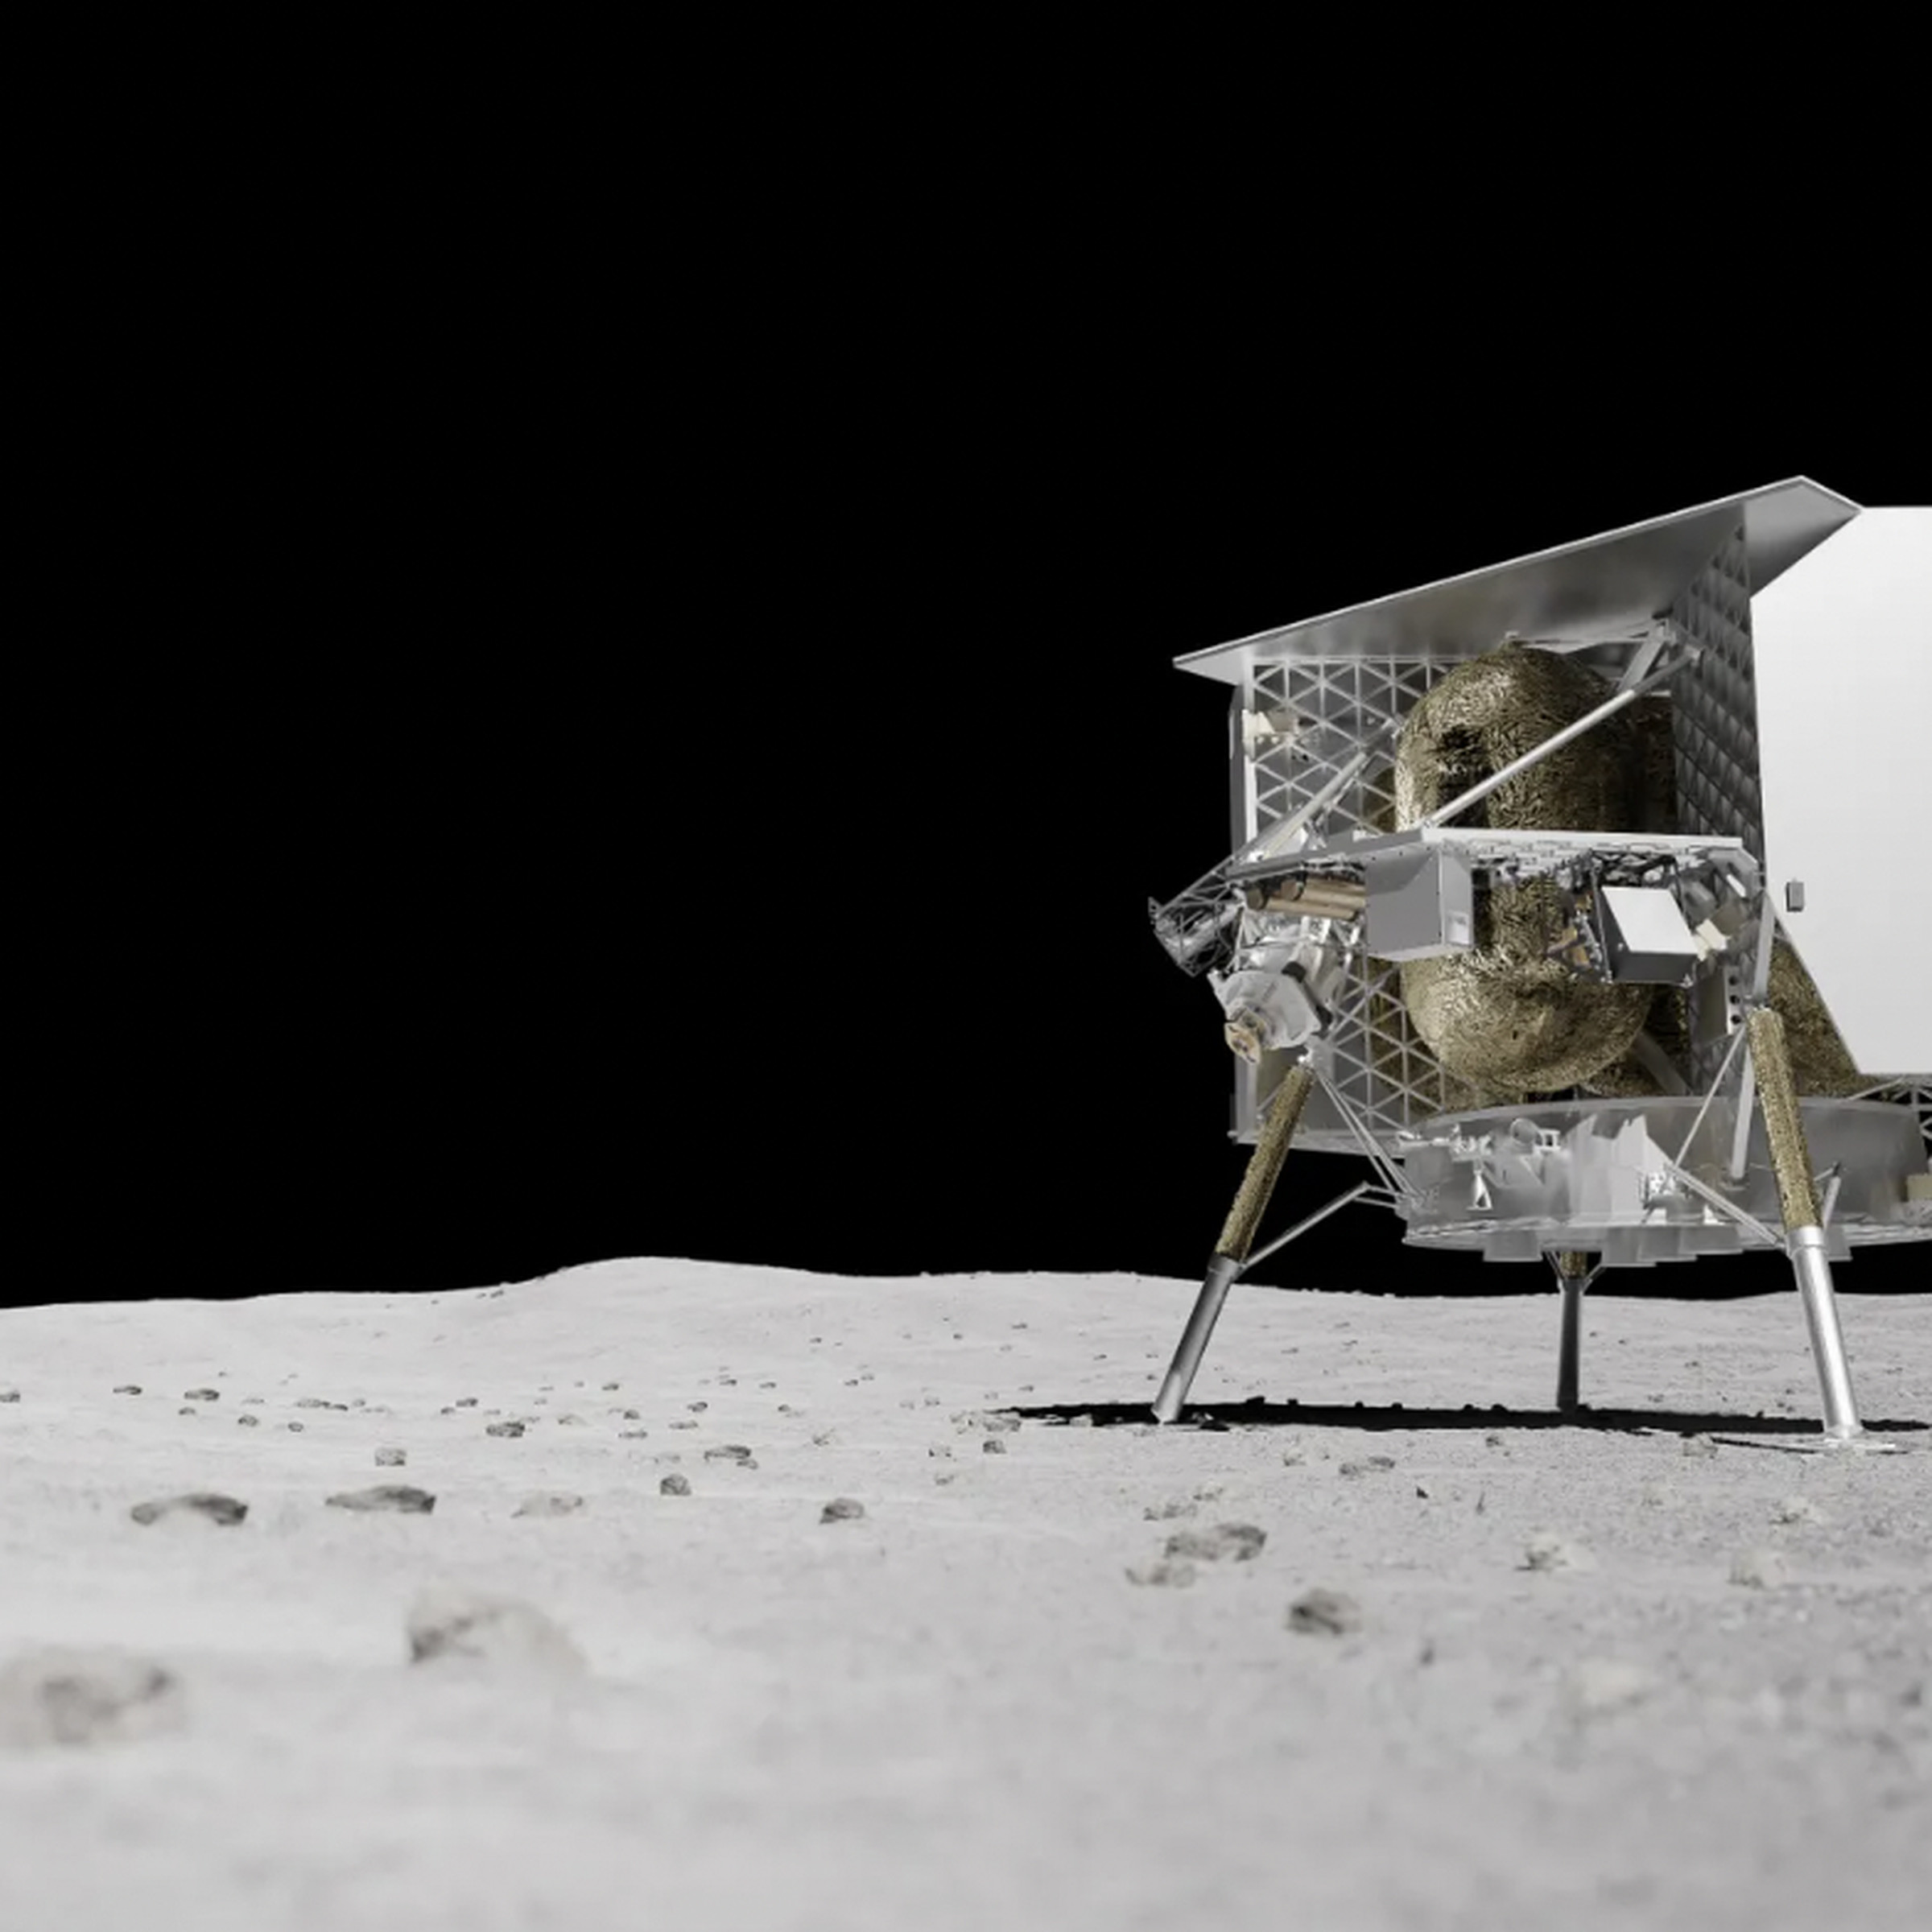 An image of the Peregrine space lander on the Moon. 